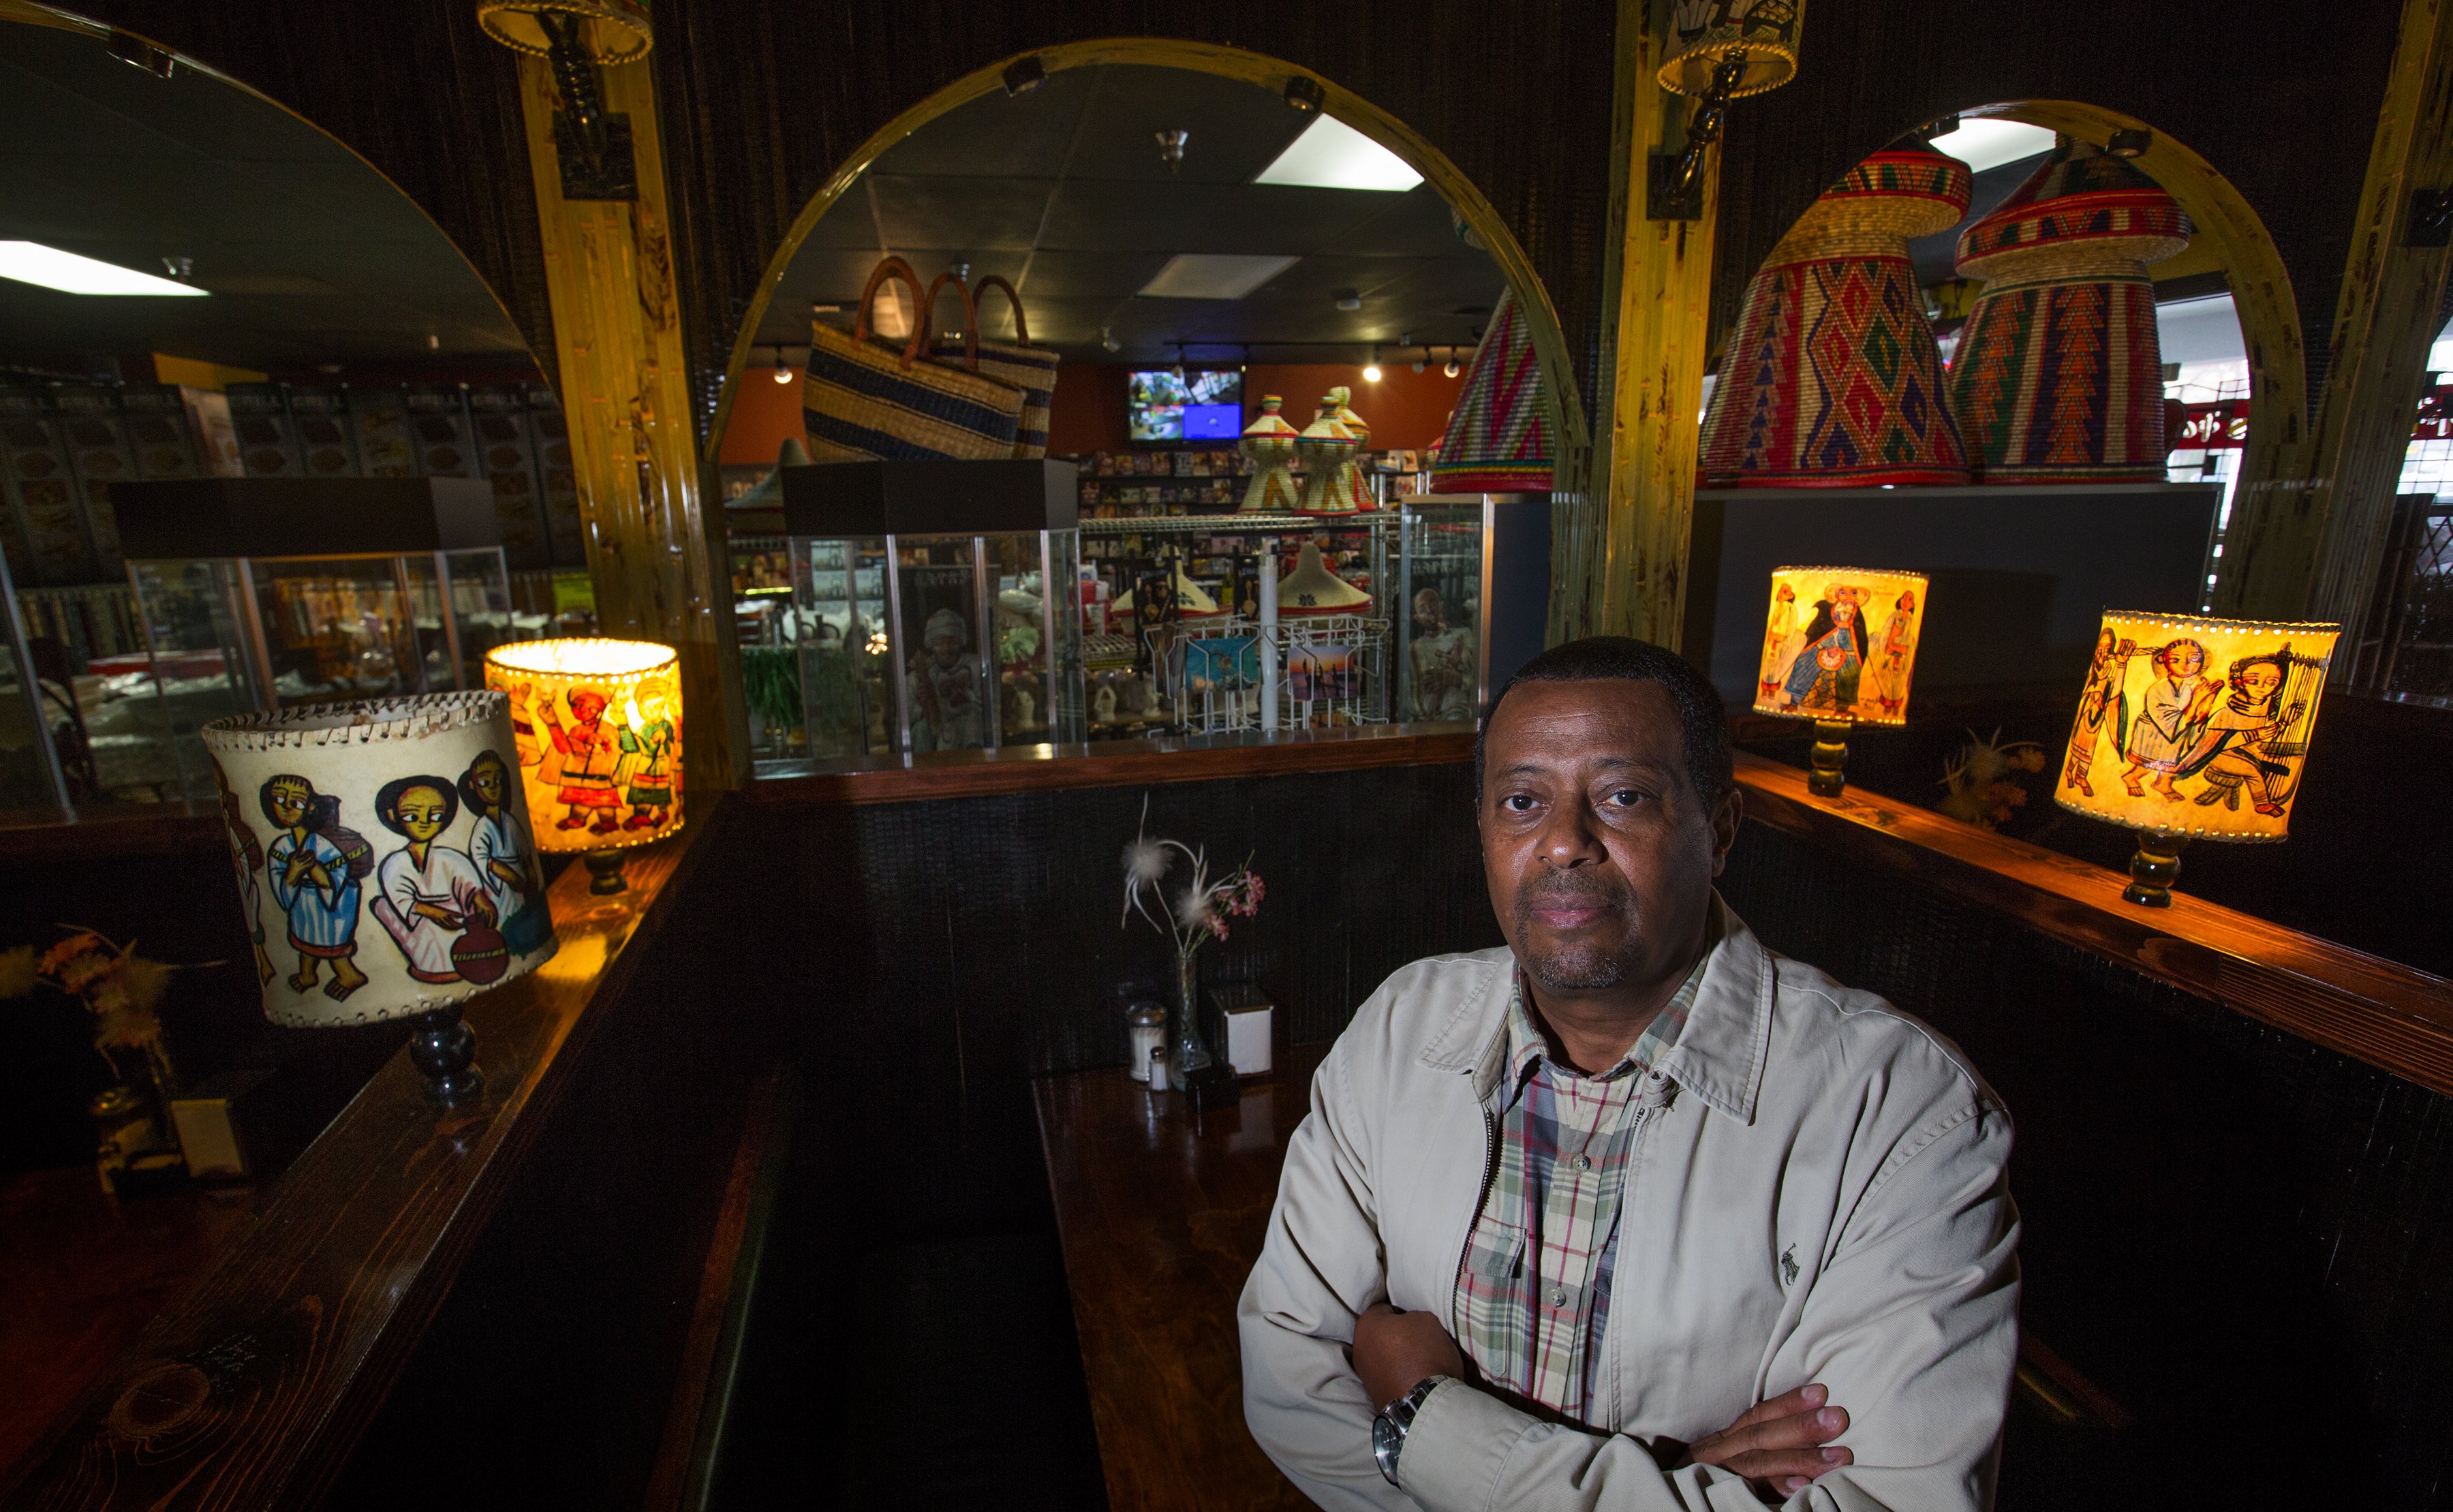 Berhane Amanuel, owner of East Africa Imports (and restaurant) stands inside his Seattle restaurant. His store can be seen through the arches at top. East Africa Imports is a tiny little story and eatery in The Promenade, a shopping center in the Central District. It was opened in 2002 by Amanuel and his Central District native wife and they put 100k+ into adding a restaurant about 5/6 yrs ago. They recently found out that Vulcan plans to demolish/develop the shopping center meaning they'll have to move and may not be able to afford to open a restaurant again.